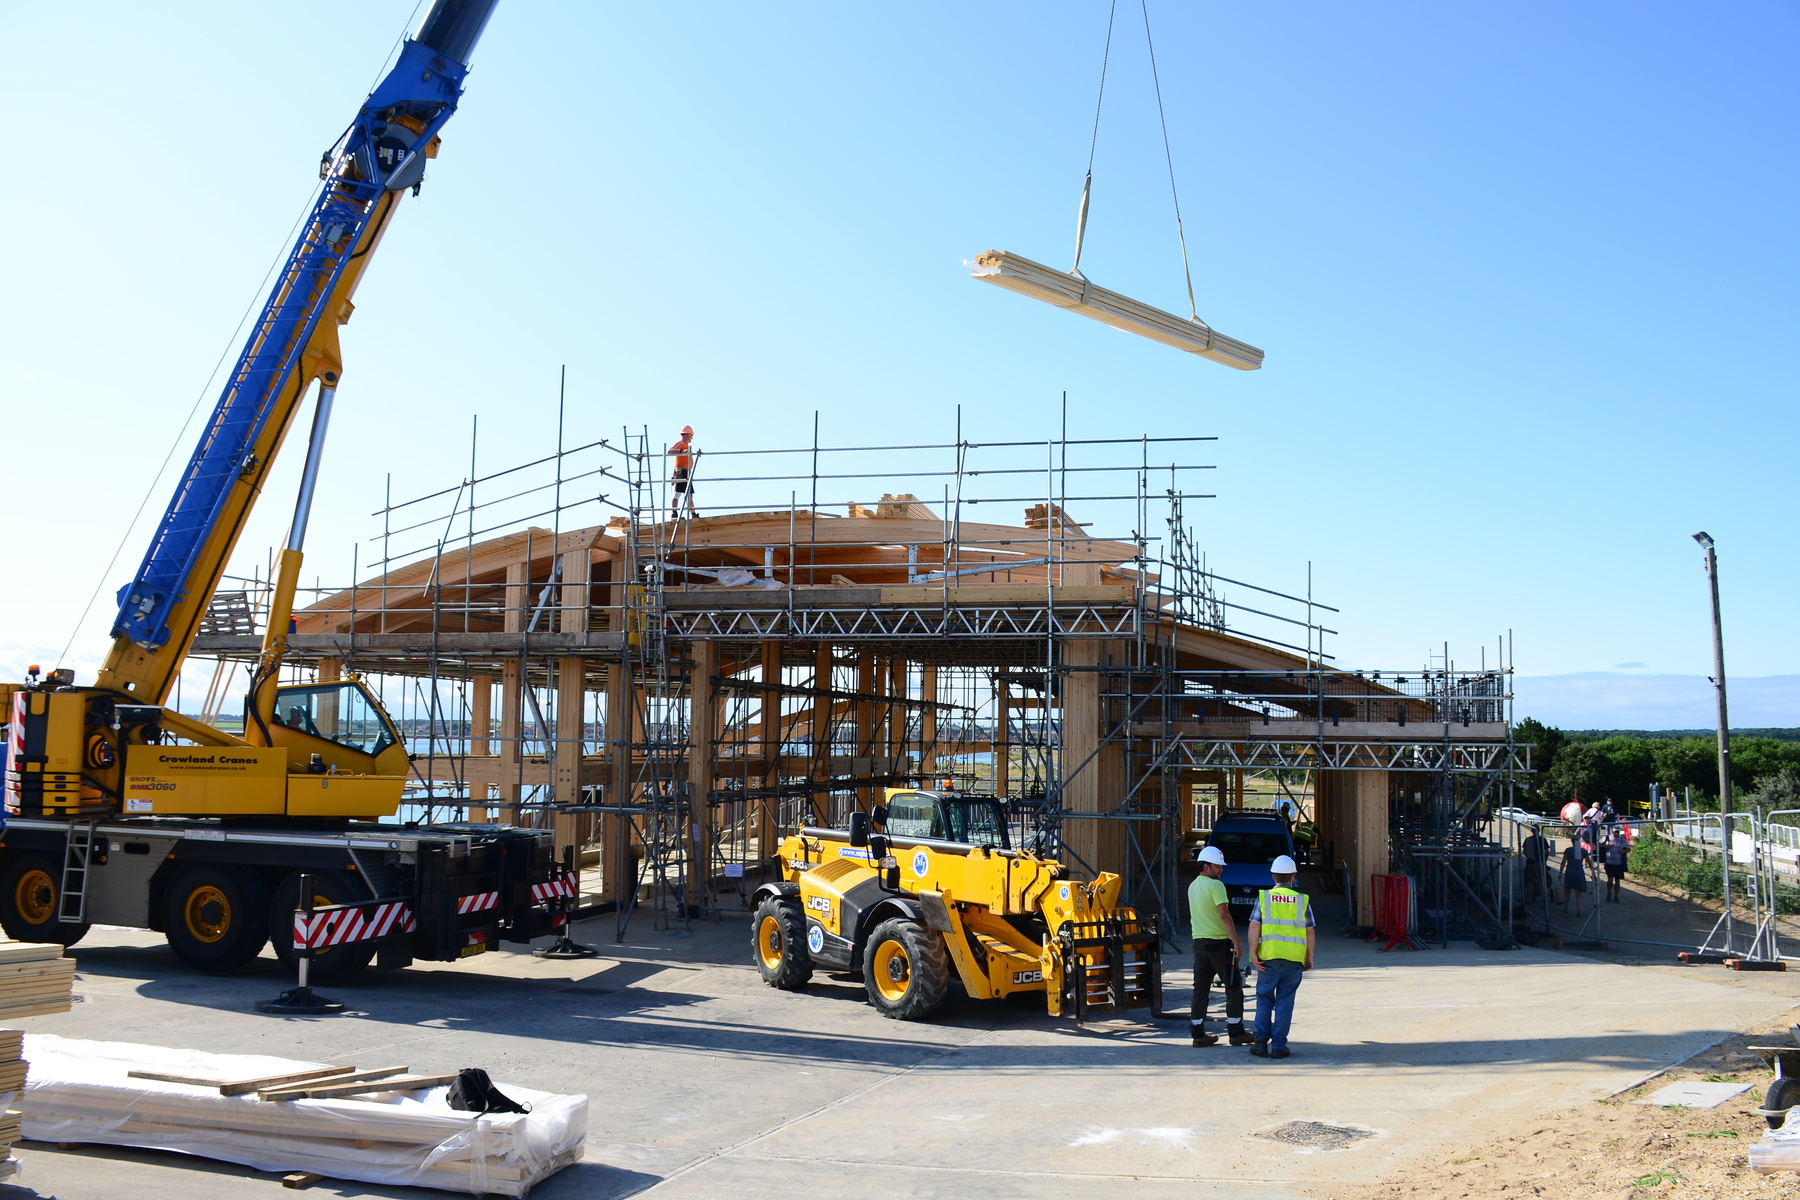 Craning planks onto the boathouse roof